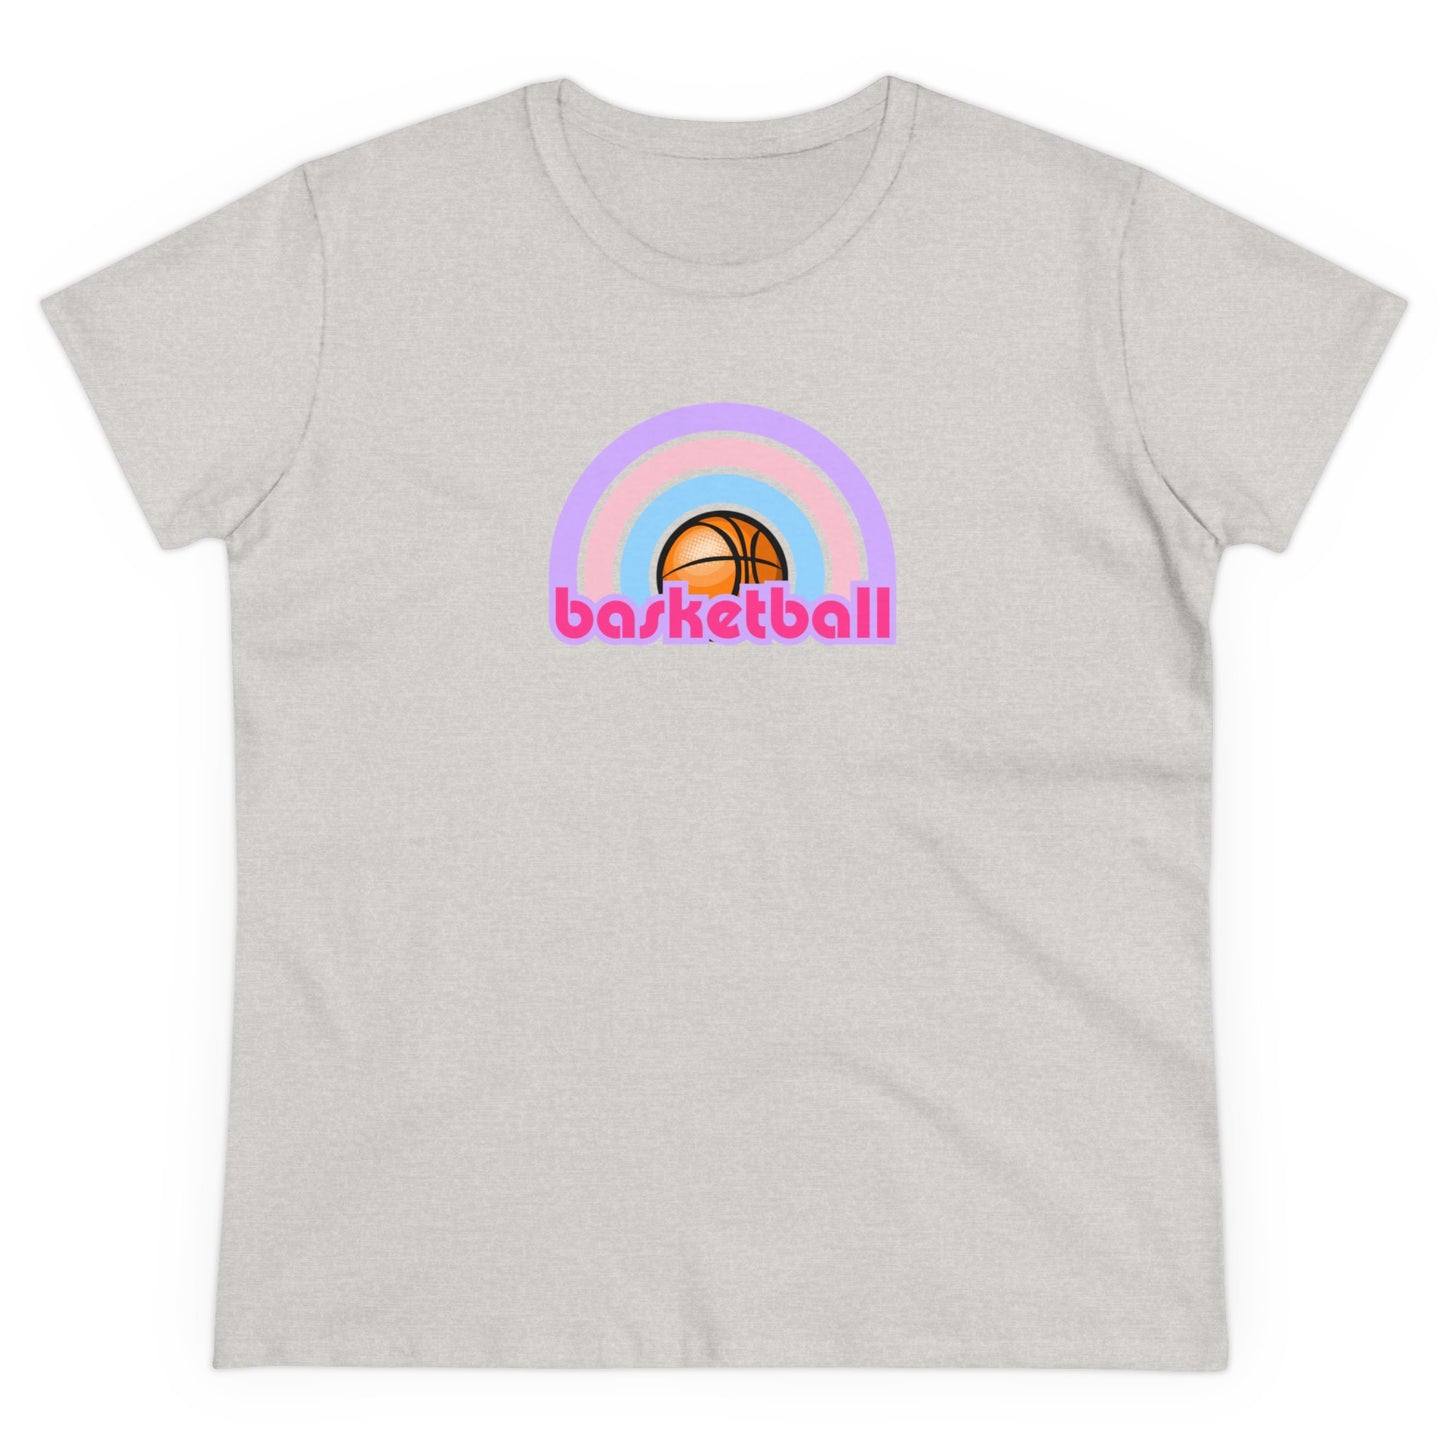 Women's Rainbow Basketball Midweight Cotton Tee, Cute Design, Retro 70's, Pink Basketball T-Shirts for Ladies, Love of Basketball